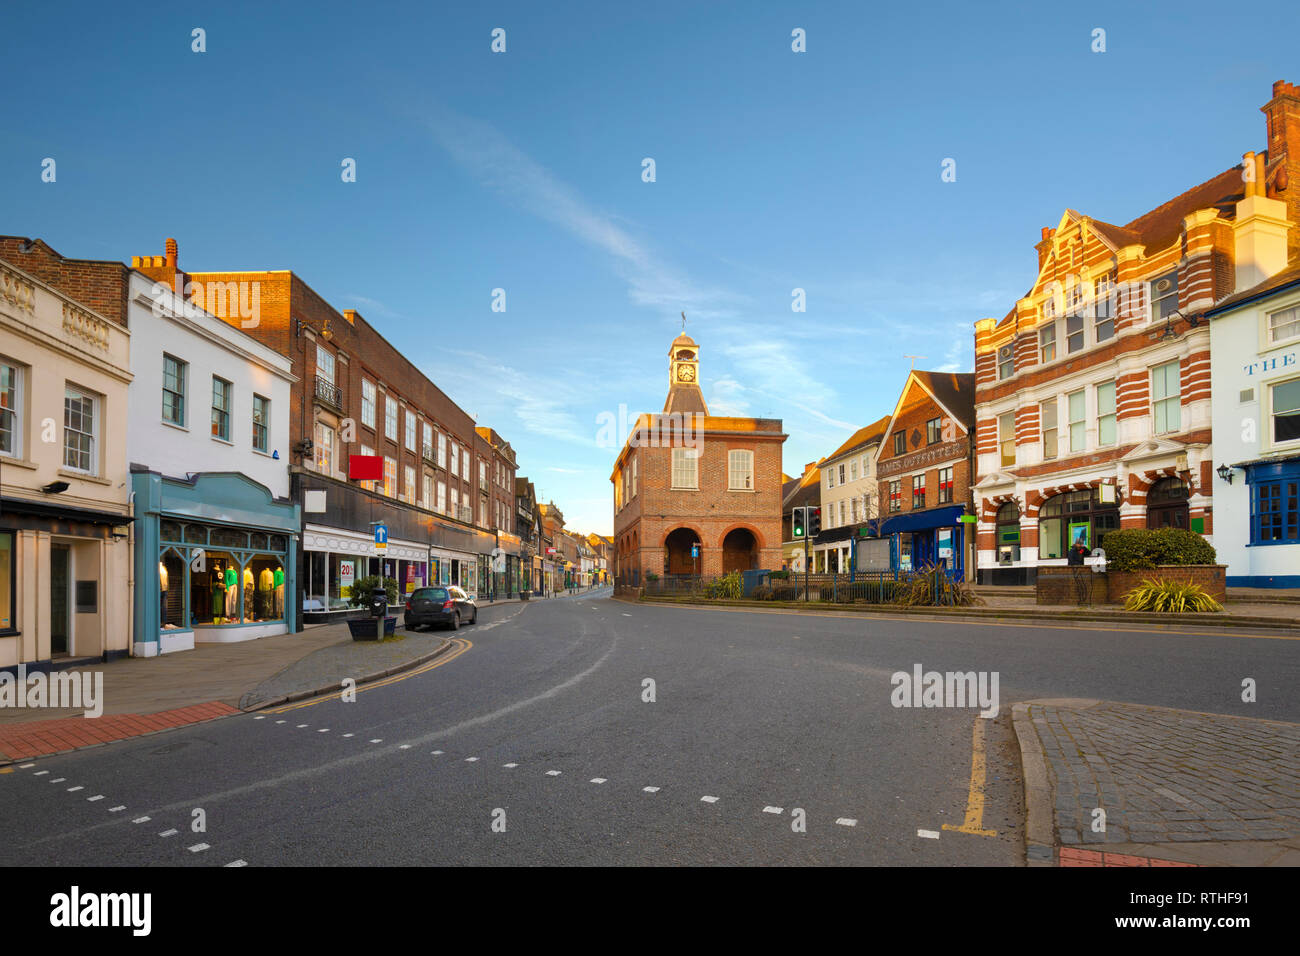 Reigate High Street and the Old Town Hall at sunrise, Reigate, Surrey, England, United Kingdom, Europe Stock Photo